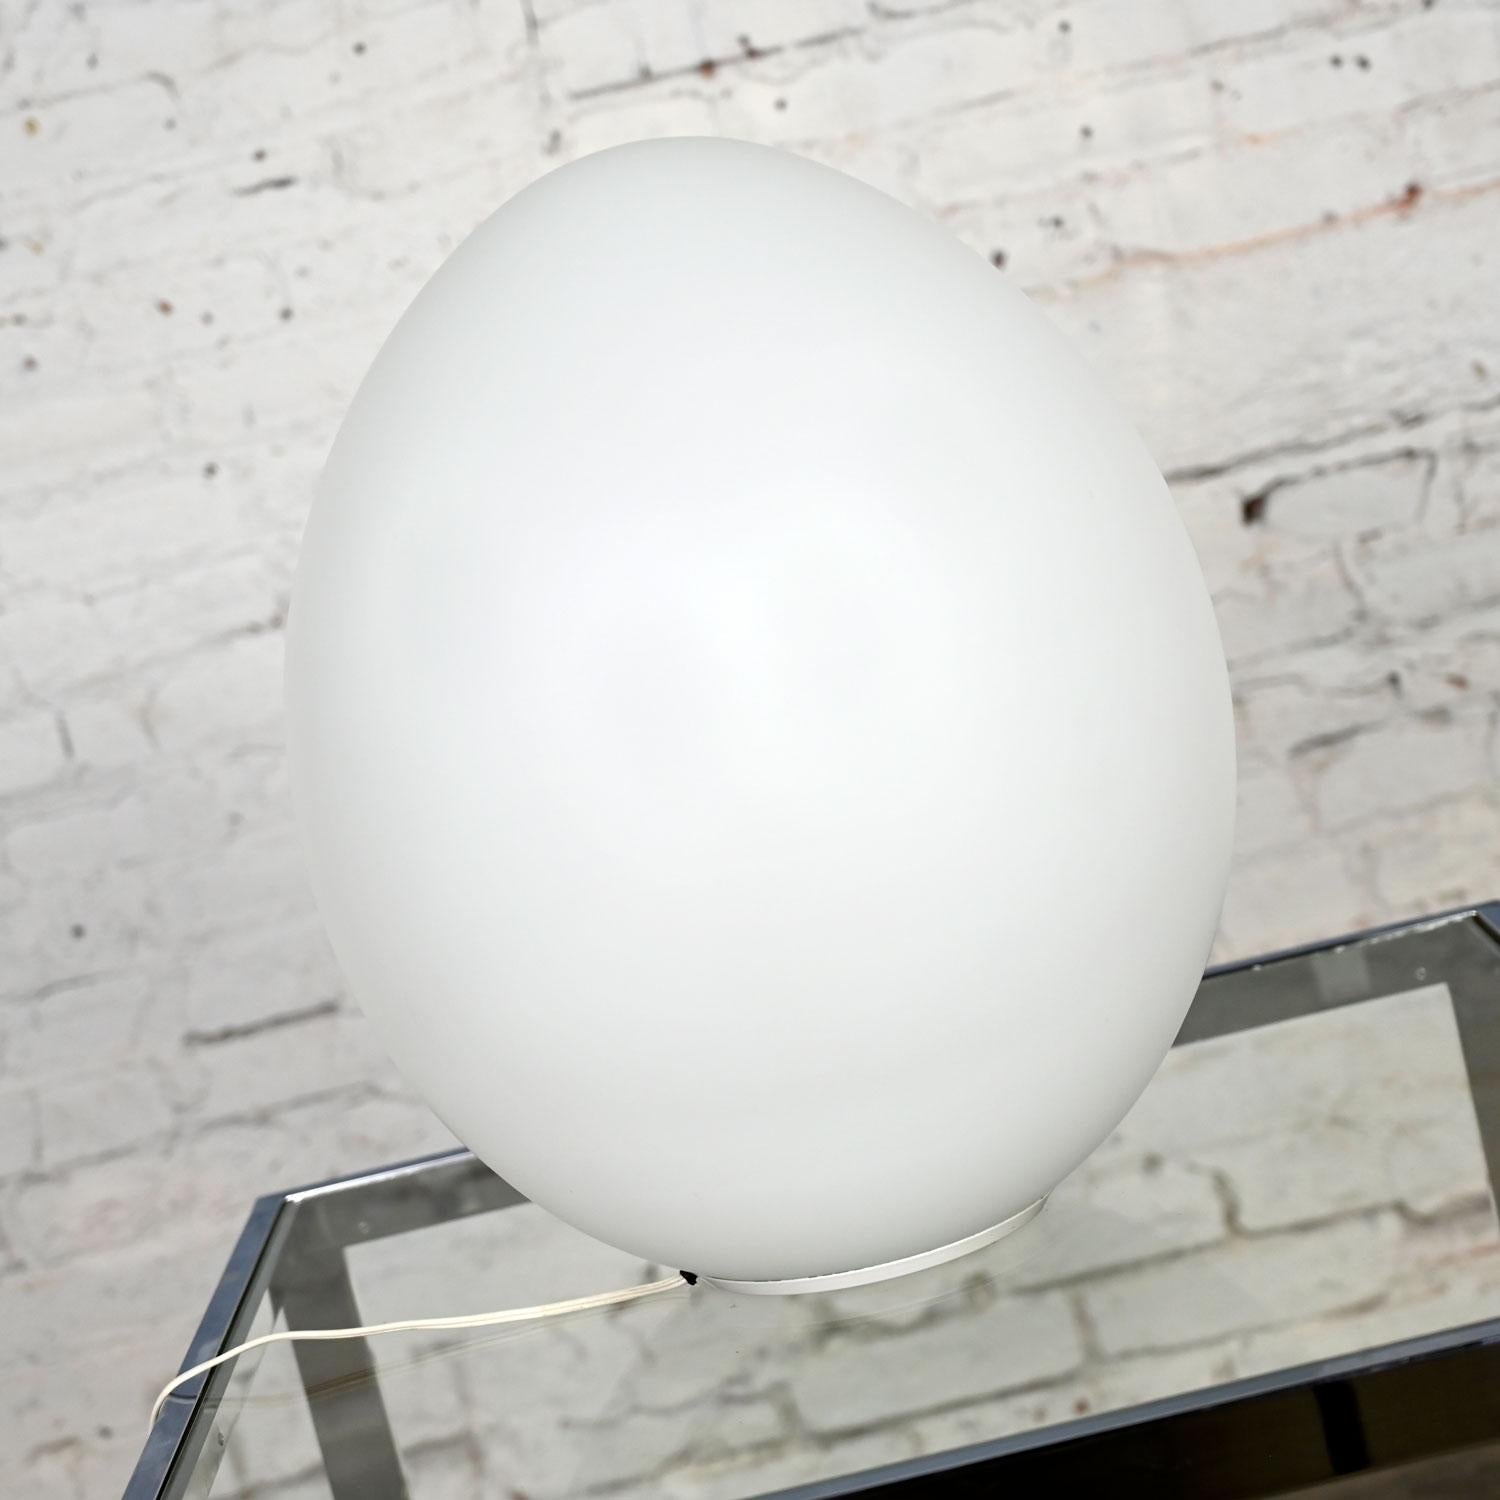 Gorgeous vintage Modern sculpted egg lamp large scale model V-1318 by Laurel Lamp Company with Italian white frosted glass globe. Beautiful condition, keeping in mind that this is vintage and not new so will have signs of use and wear. Please see